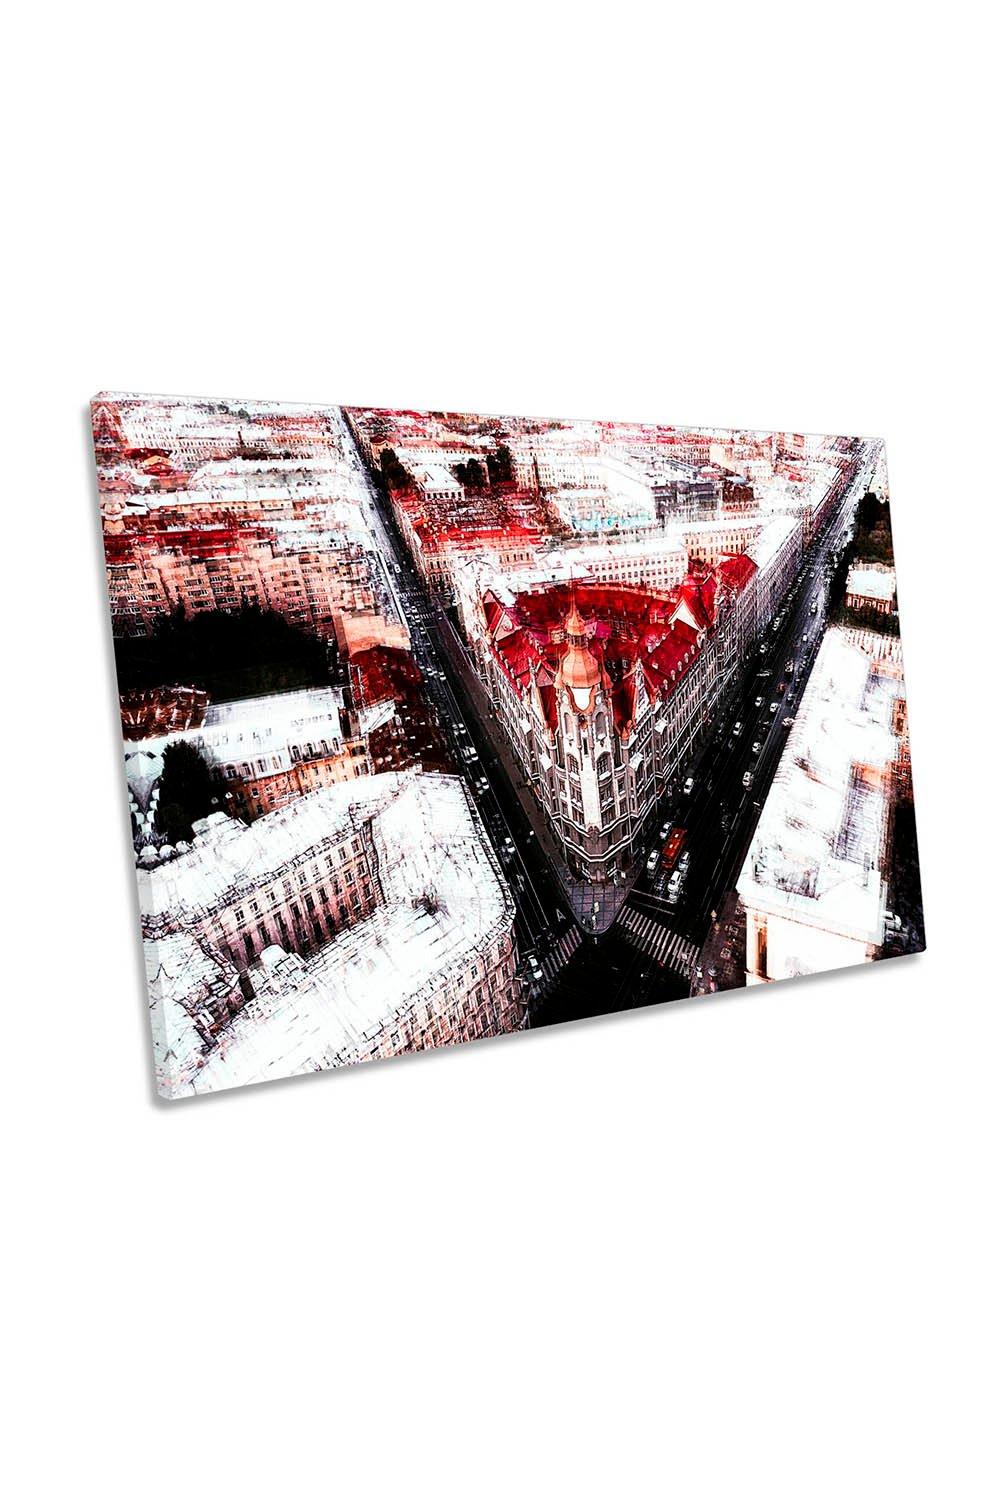 The Red Arrow Saint Petersburg Russia Canvas Wall Art Picture Print